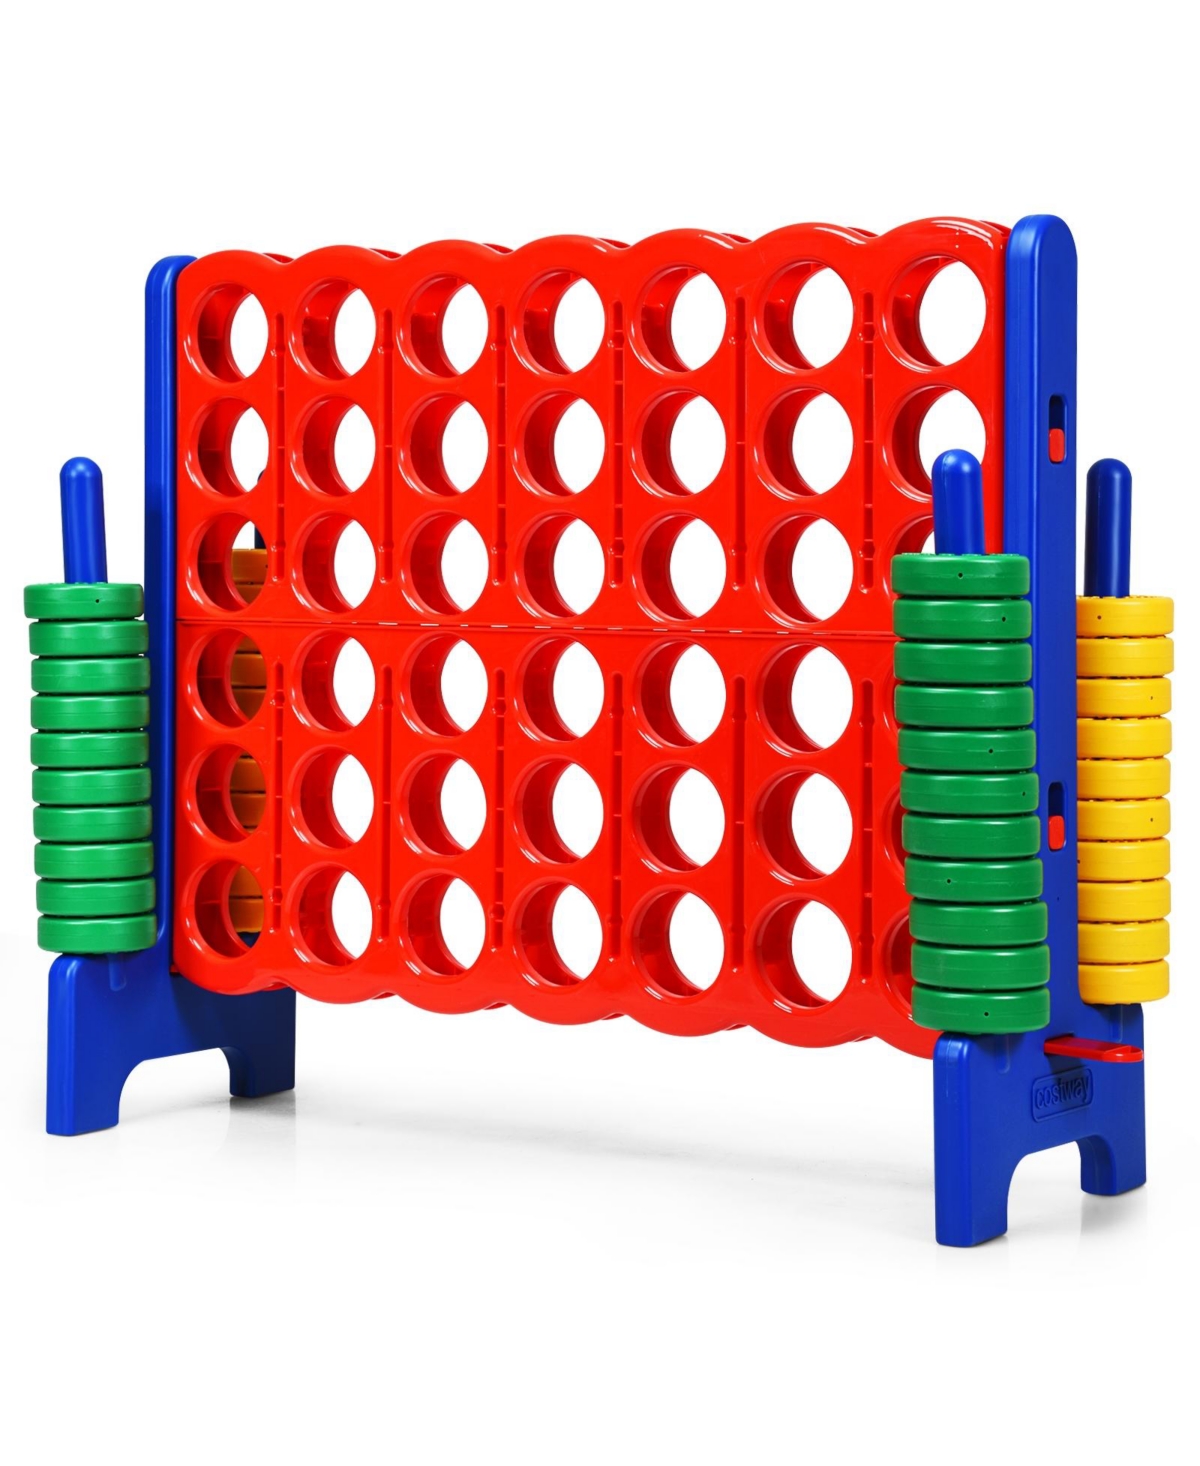 Jumbo 4-to-Score Giant Game Set with 42 Jumbo Rings and Quick-Release Slider-Blue - Open Miscellaneous